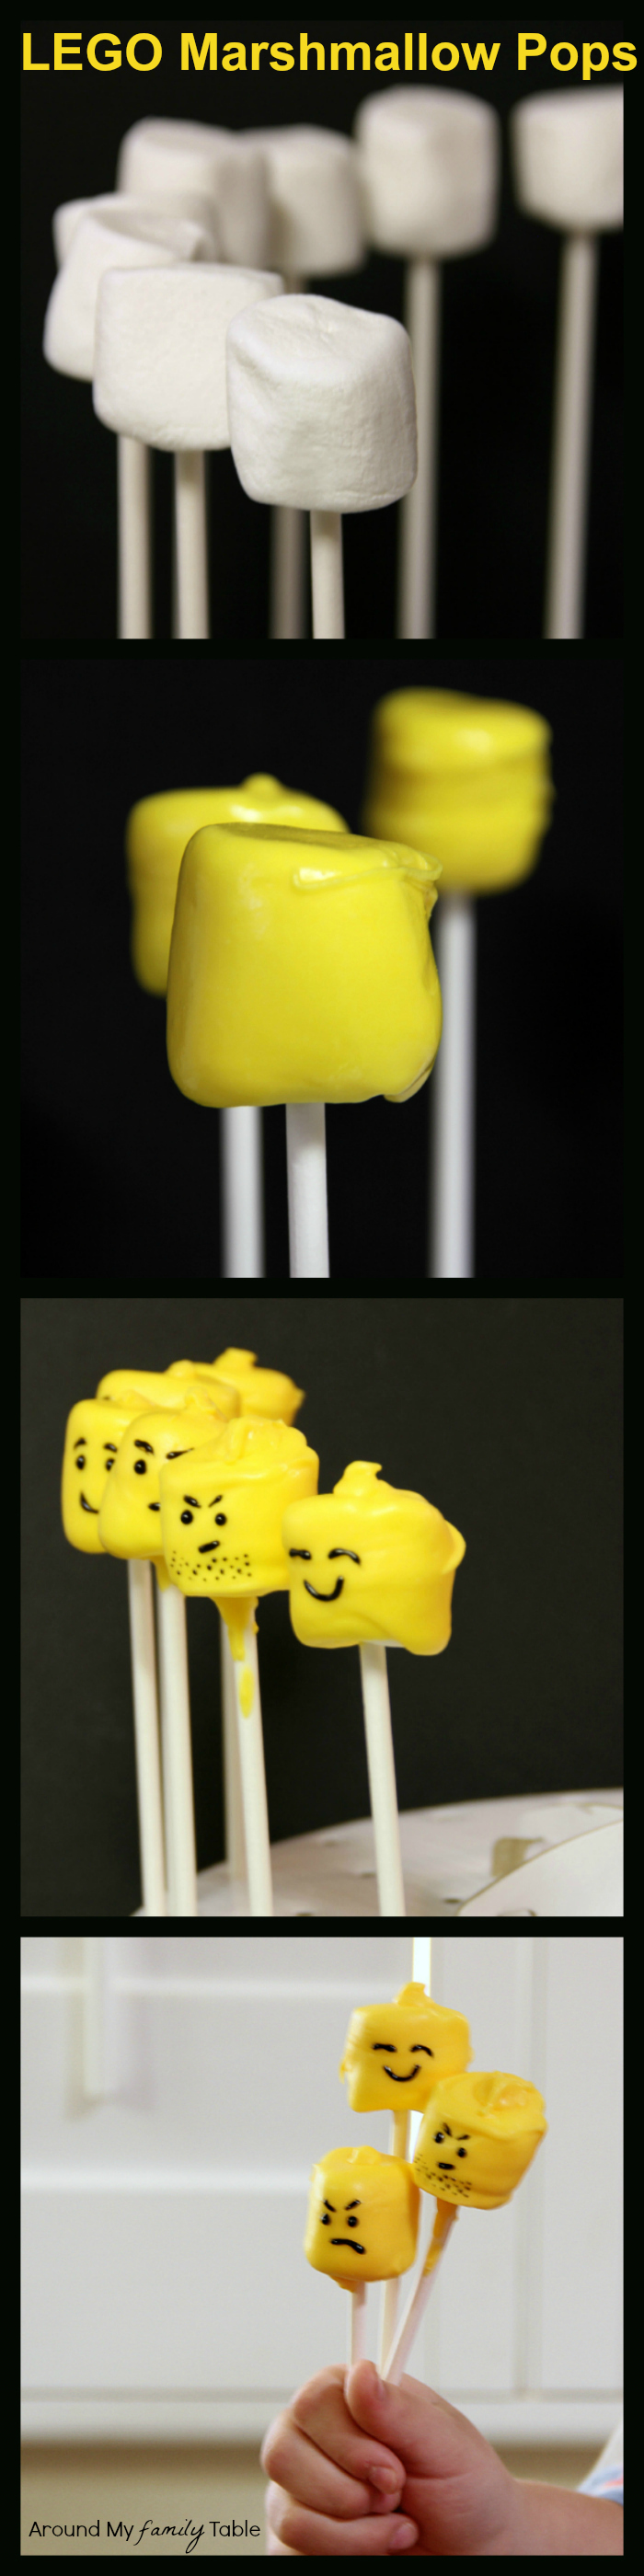 How to Make Lego Marshmallow Pops